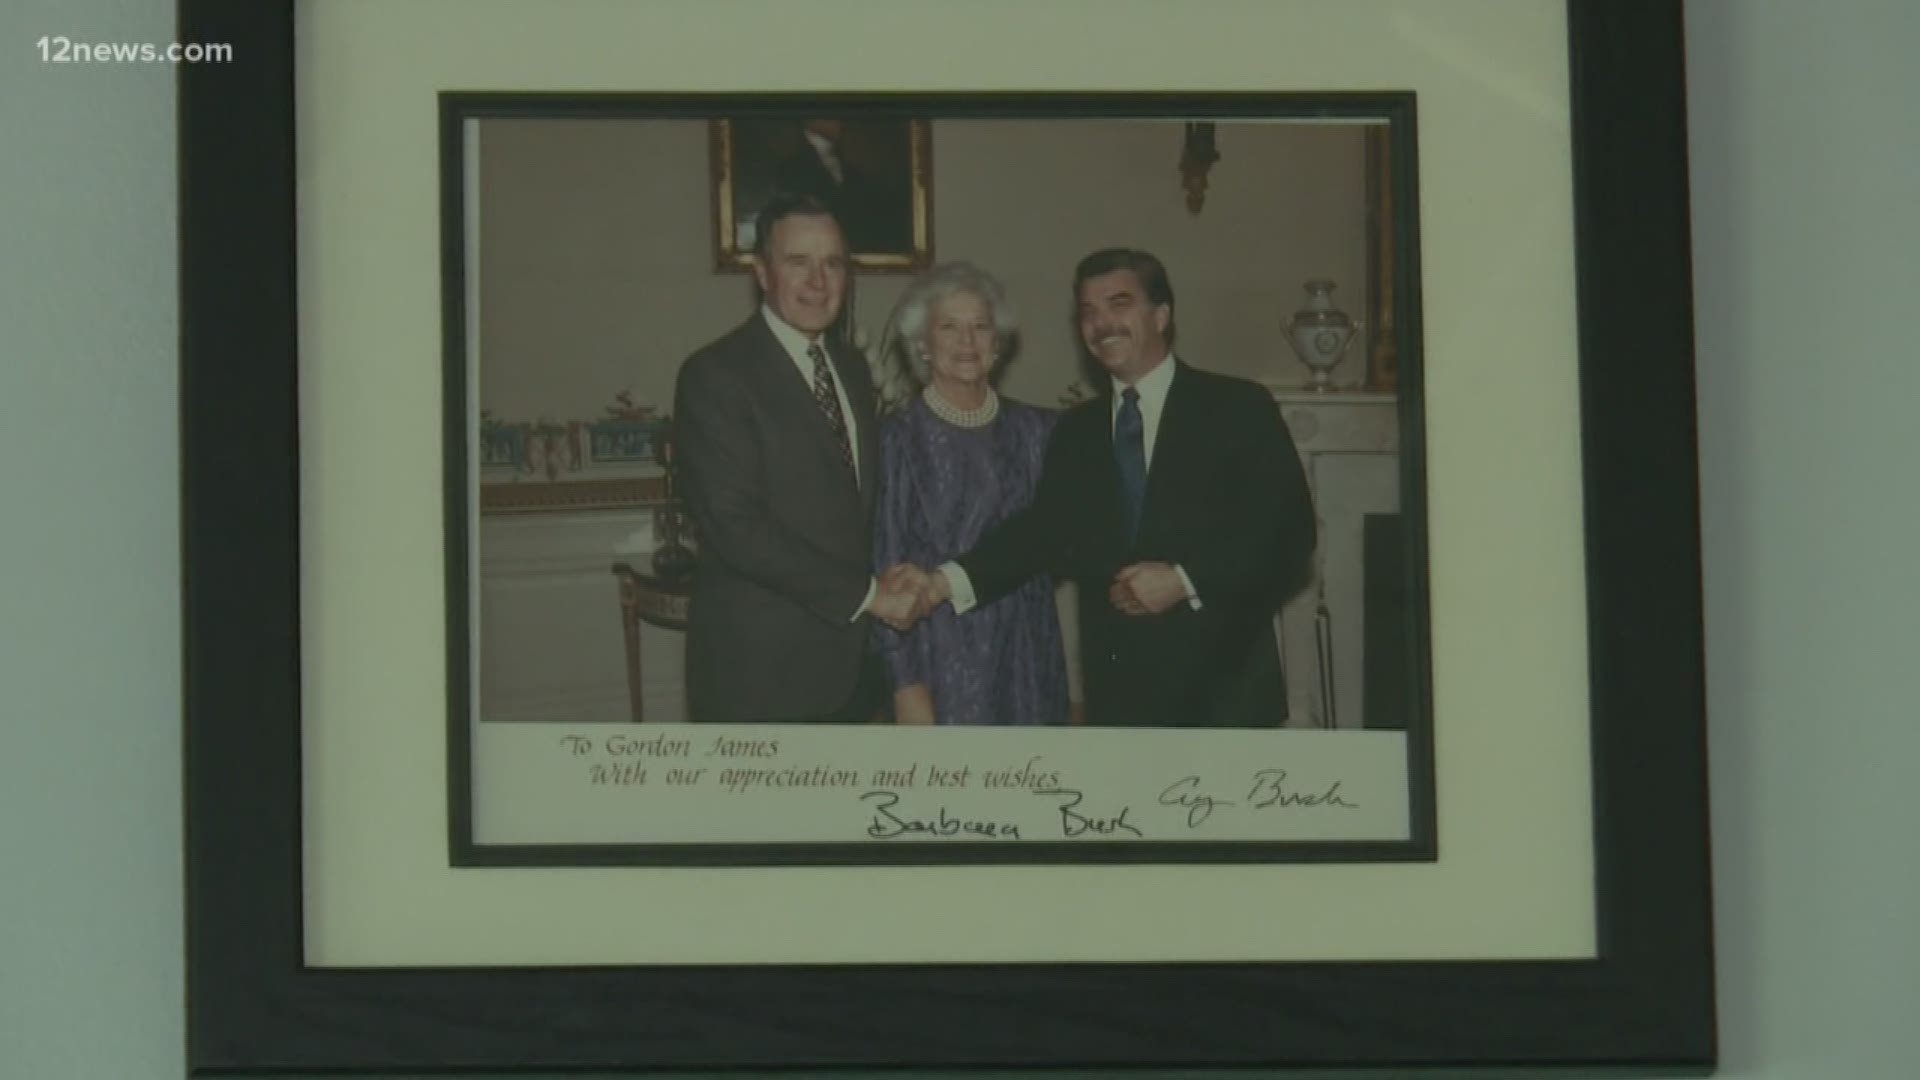 Gordon James worked closely with President George H.W. Bush for more than 40 years. His walls are framed with pictures of their work and adventures together.